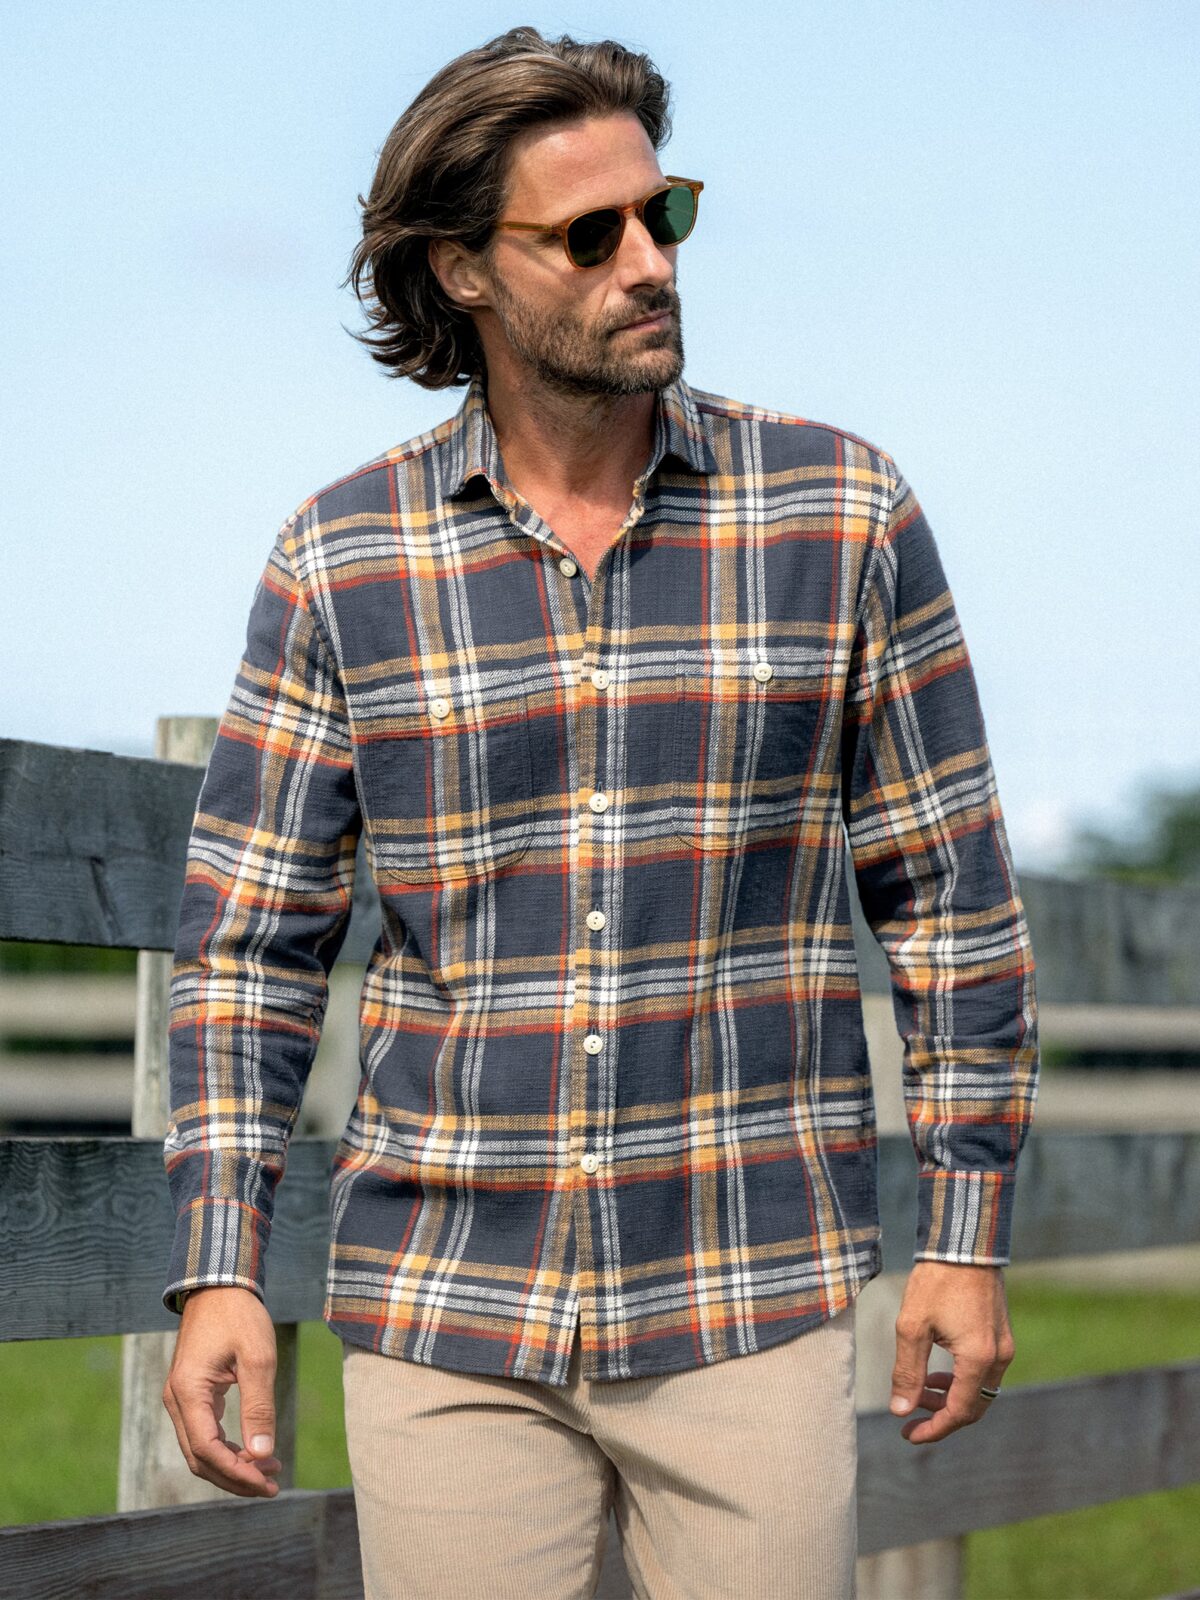 Jackson Washed Navy Gold and Red Country Plaid Shirt by Proper Cloth